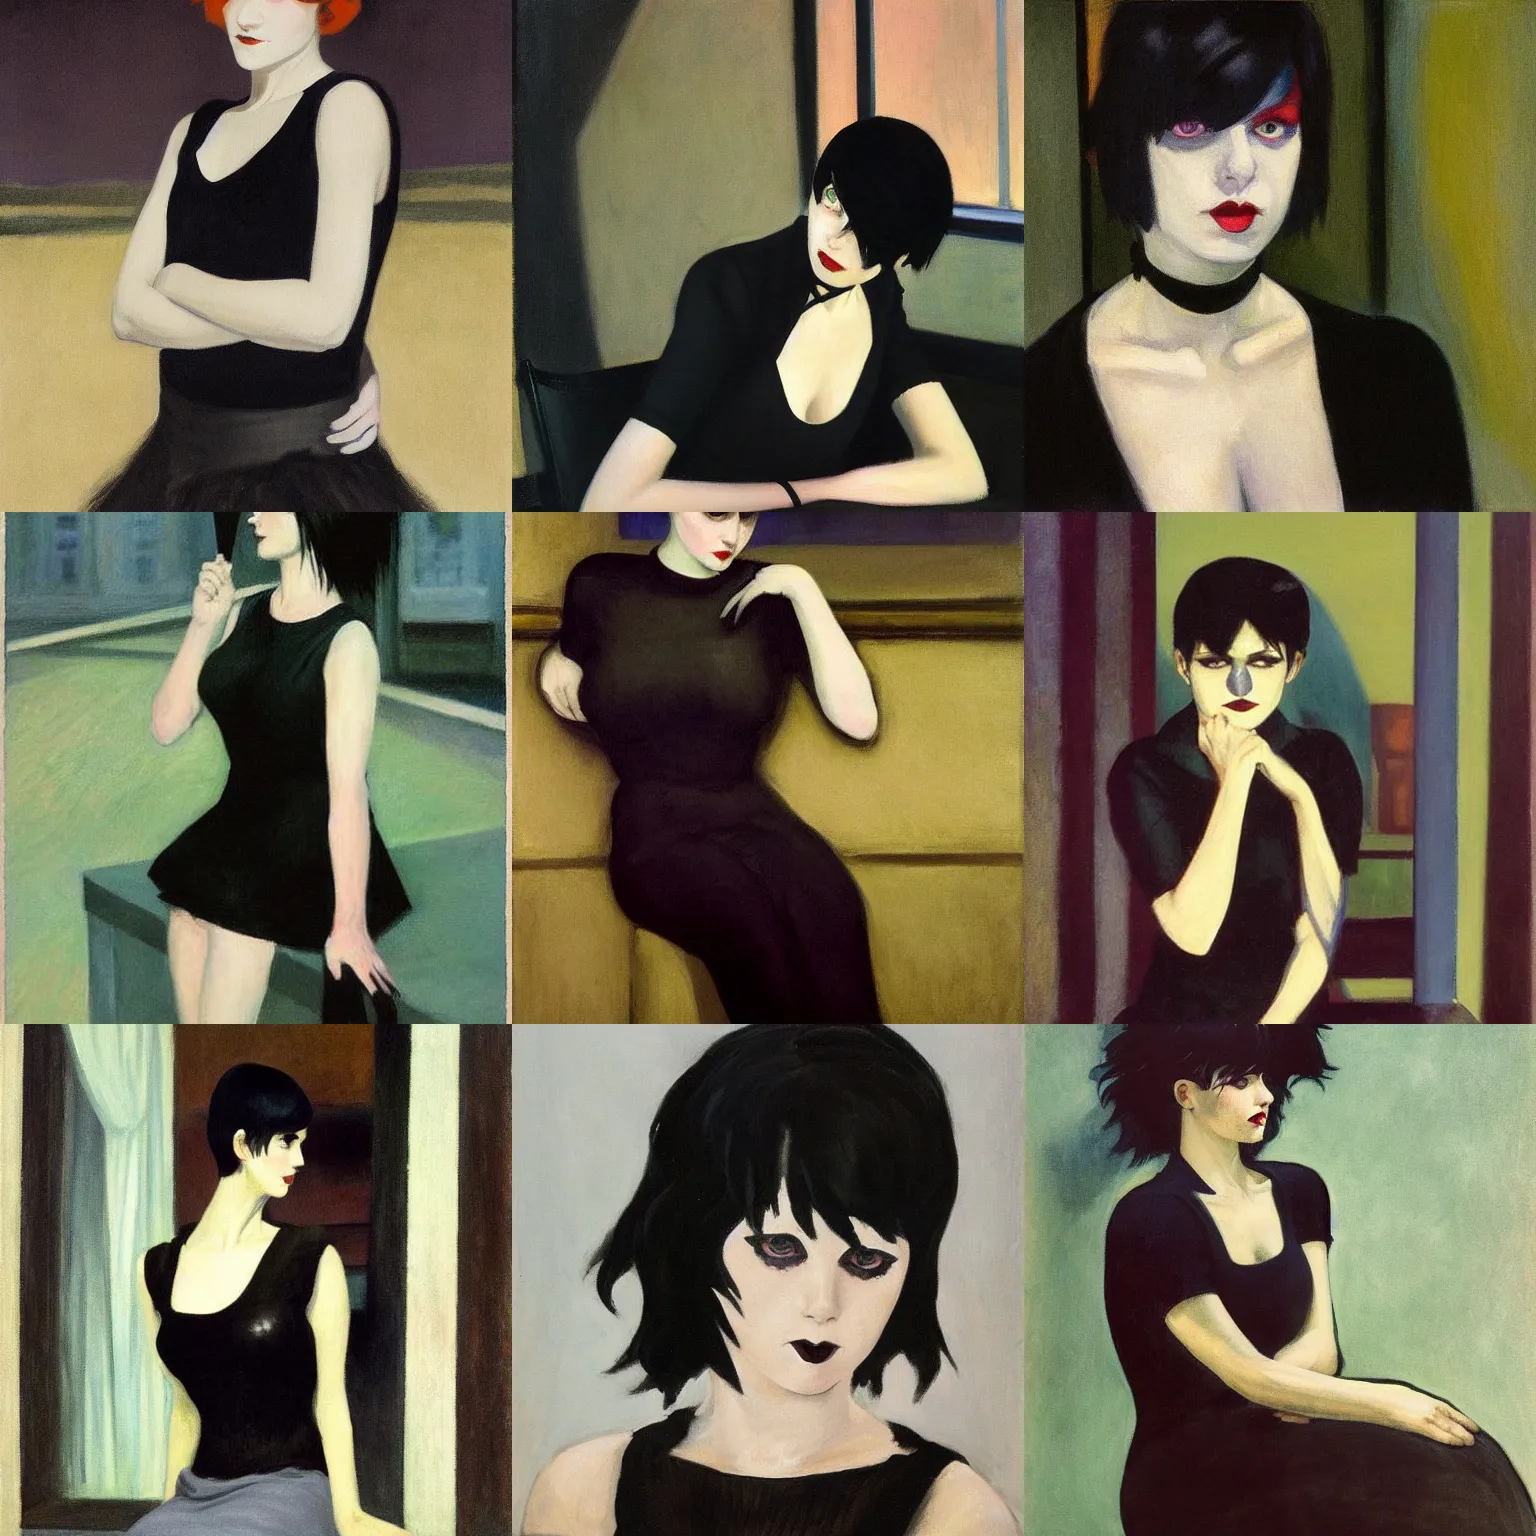 Prompt: A goth painted by Edward Hopper. Her hair is dark brown and cut into a short, messy pixie cut. She has a slightly rounded face, with a pointed chin, large entirely-black eyes, and a small nose. She is wearing a black tank top, a black leather jacket, a black knee-length skirt, a black choker, and black leather boots.